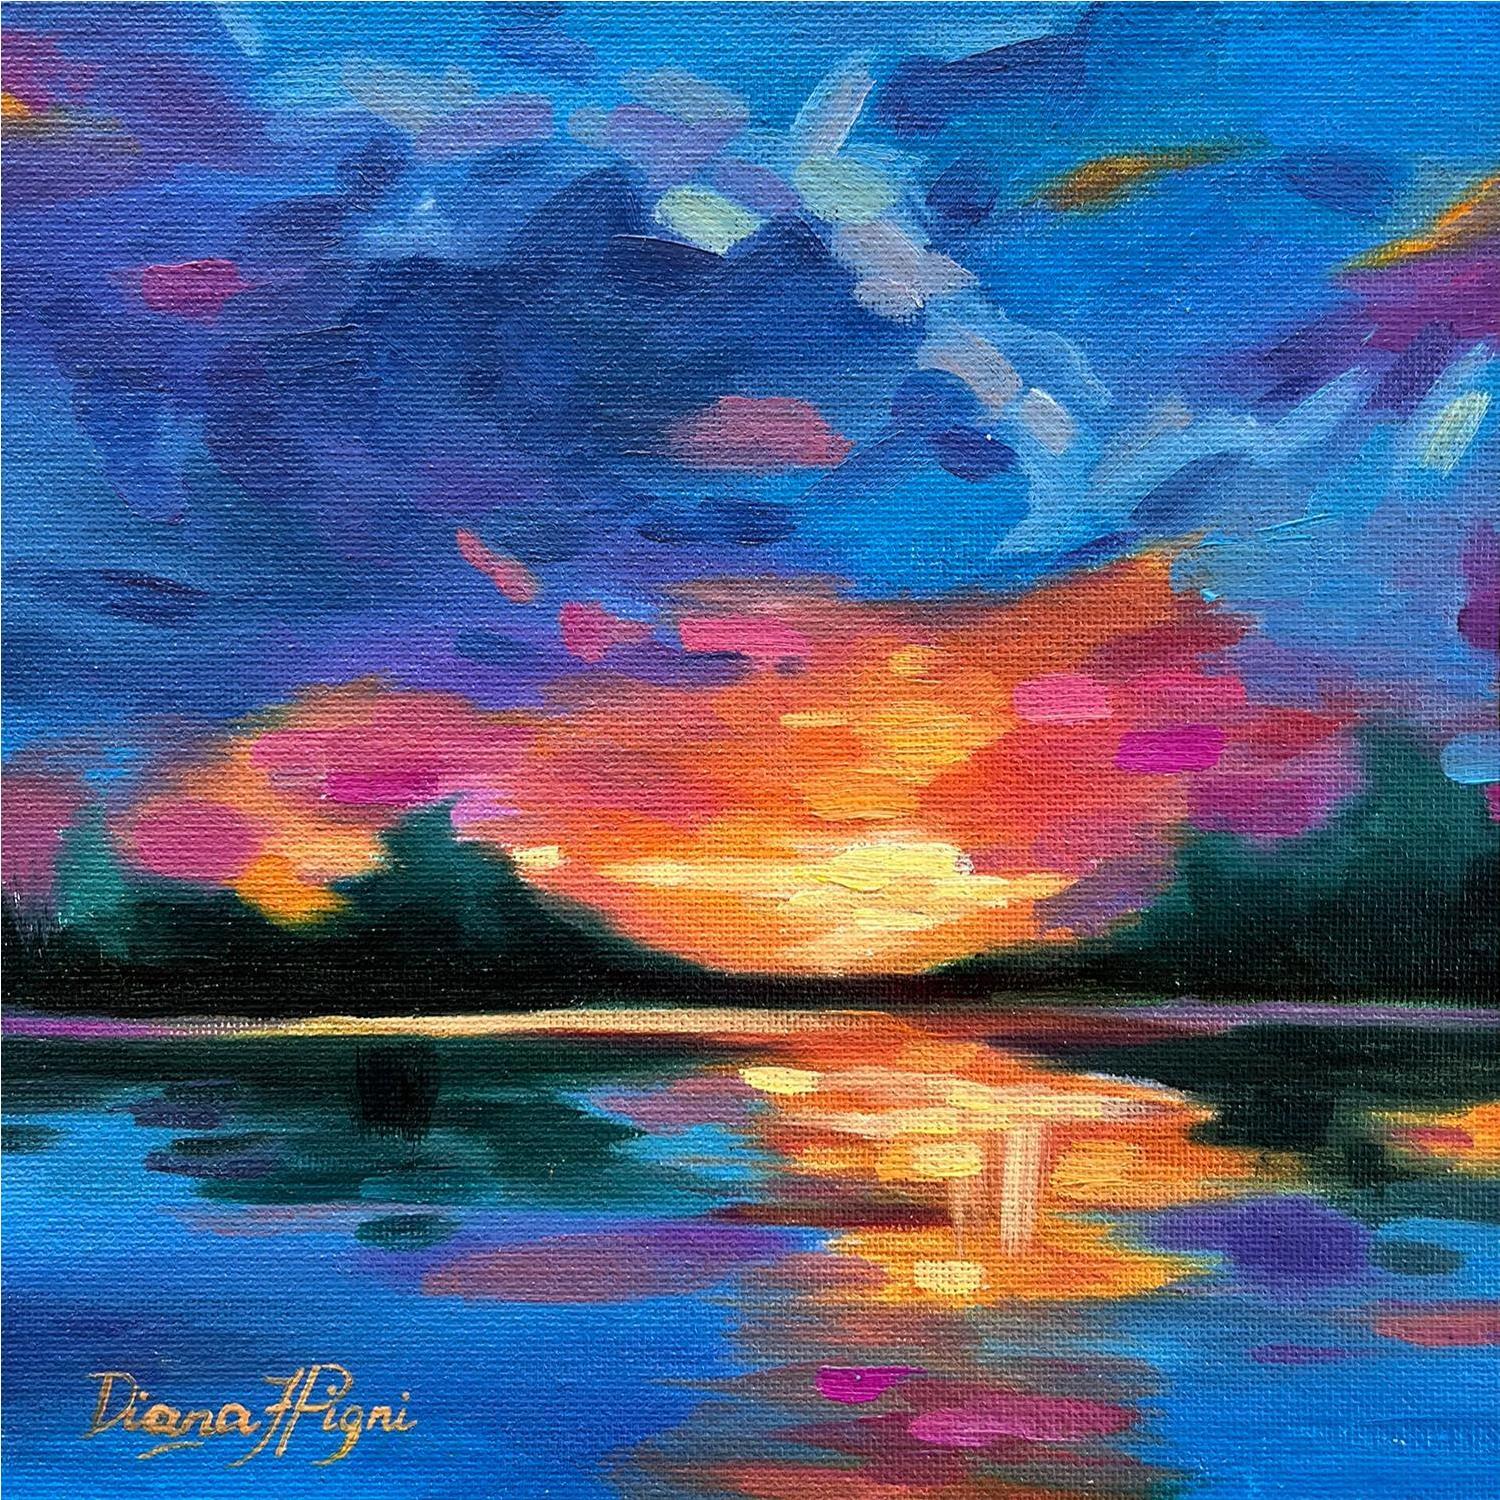 Lake Sunset Painting, Blue Landscape Watercolor Painting, Or